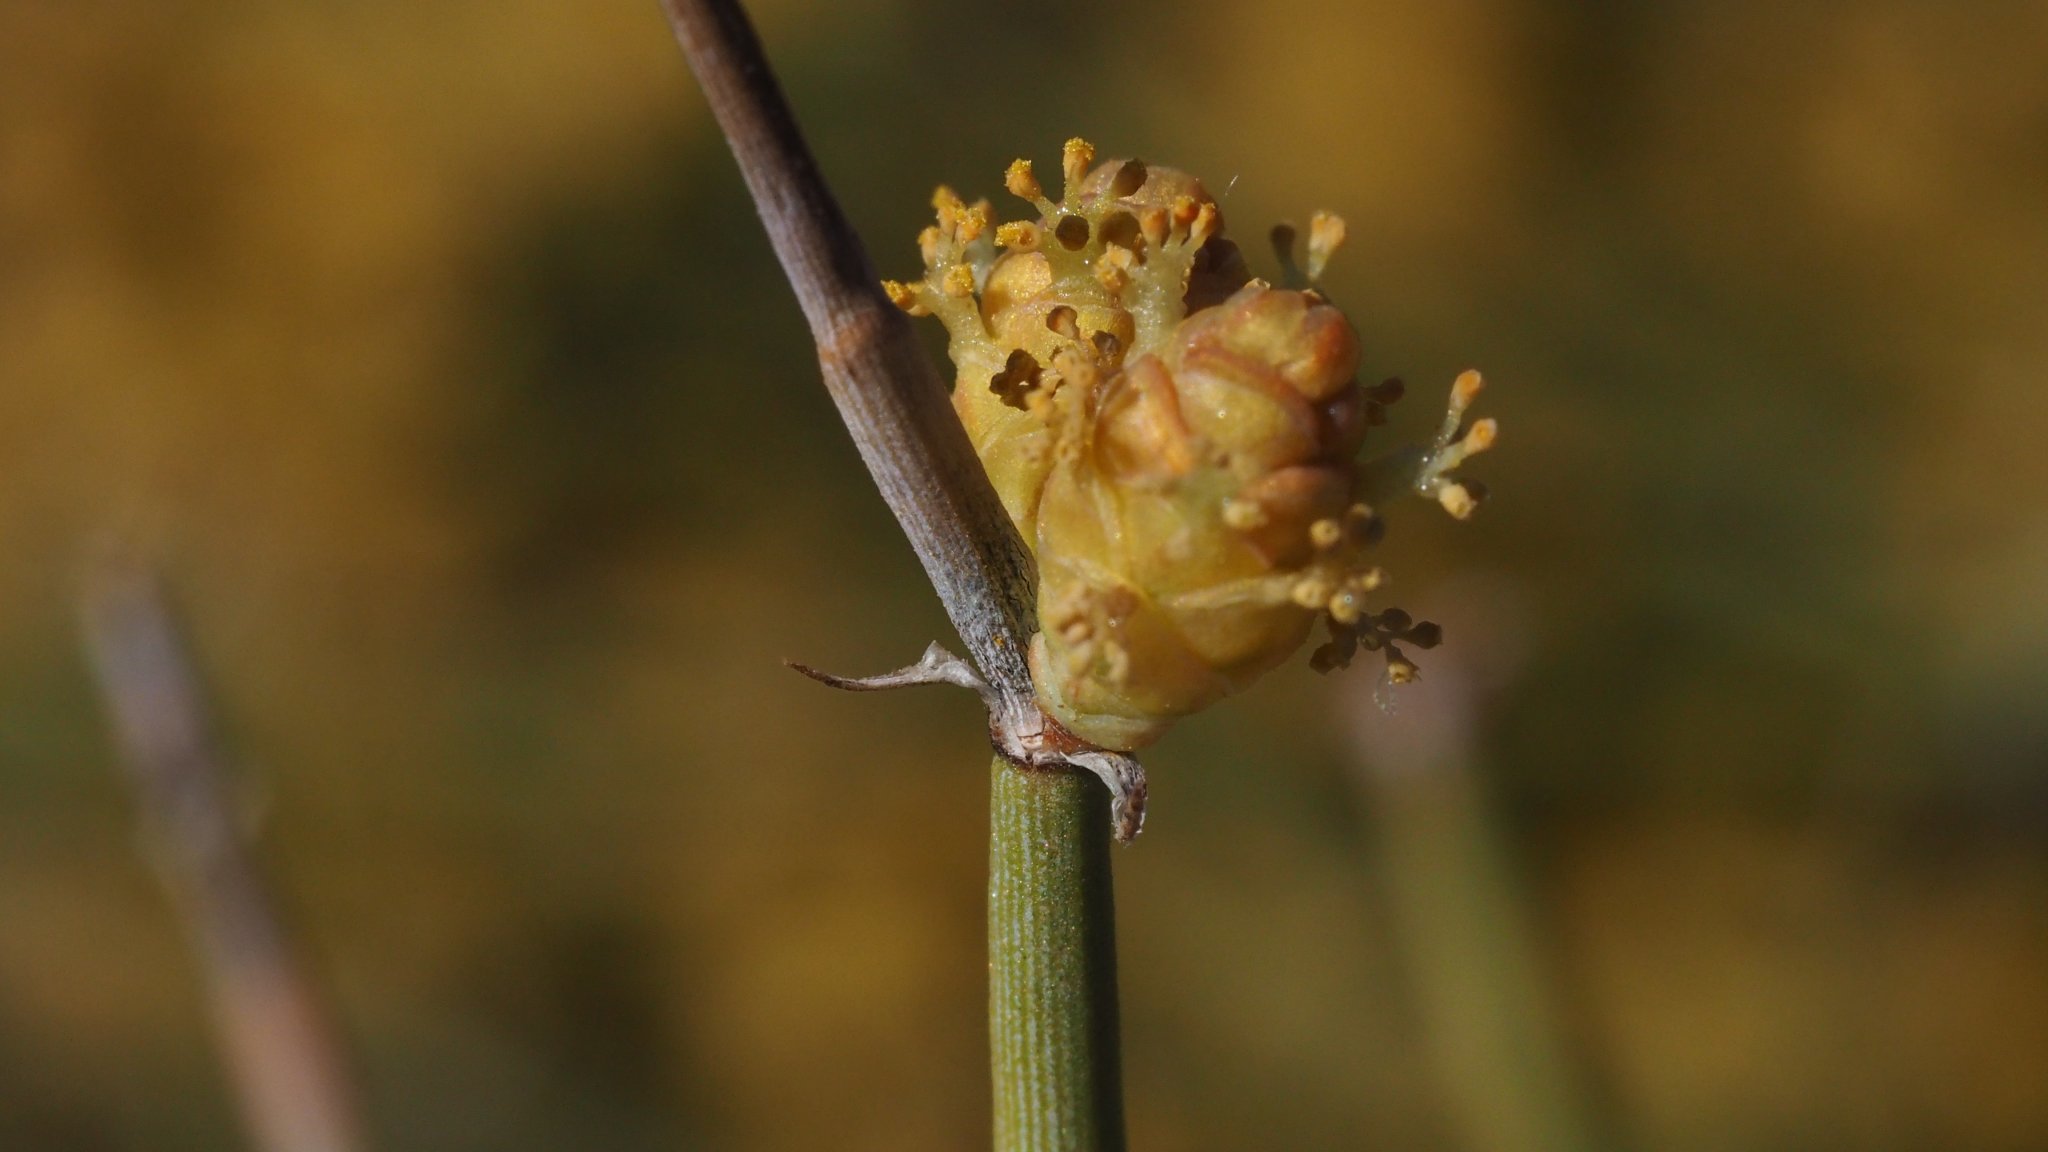 Two small cone-like strobili with structures emerging that look like anthers (small, yellow, and branching)